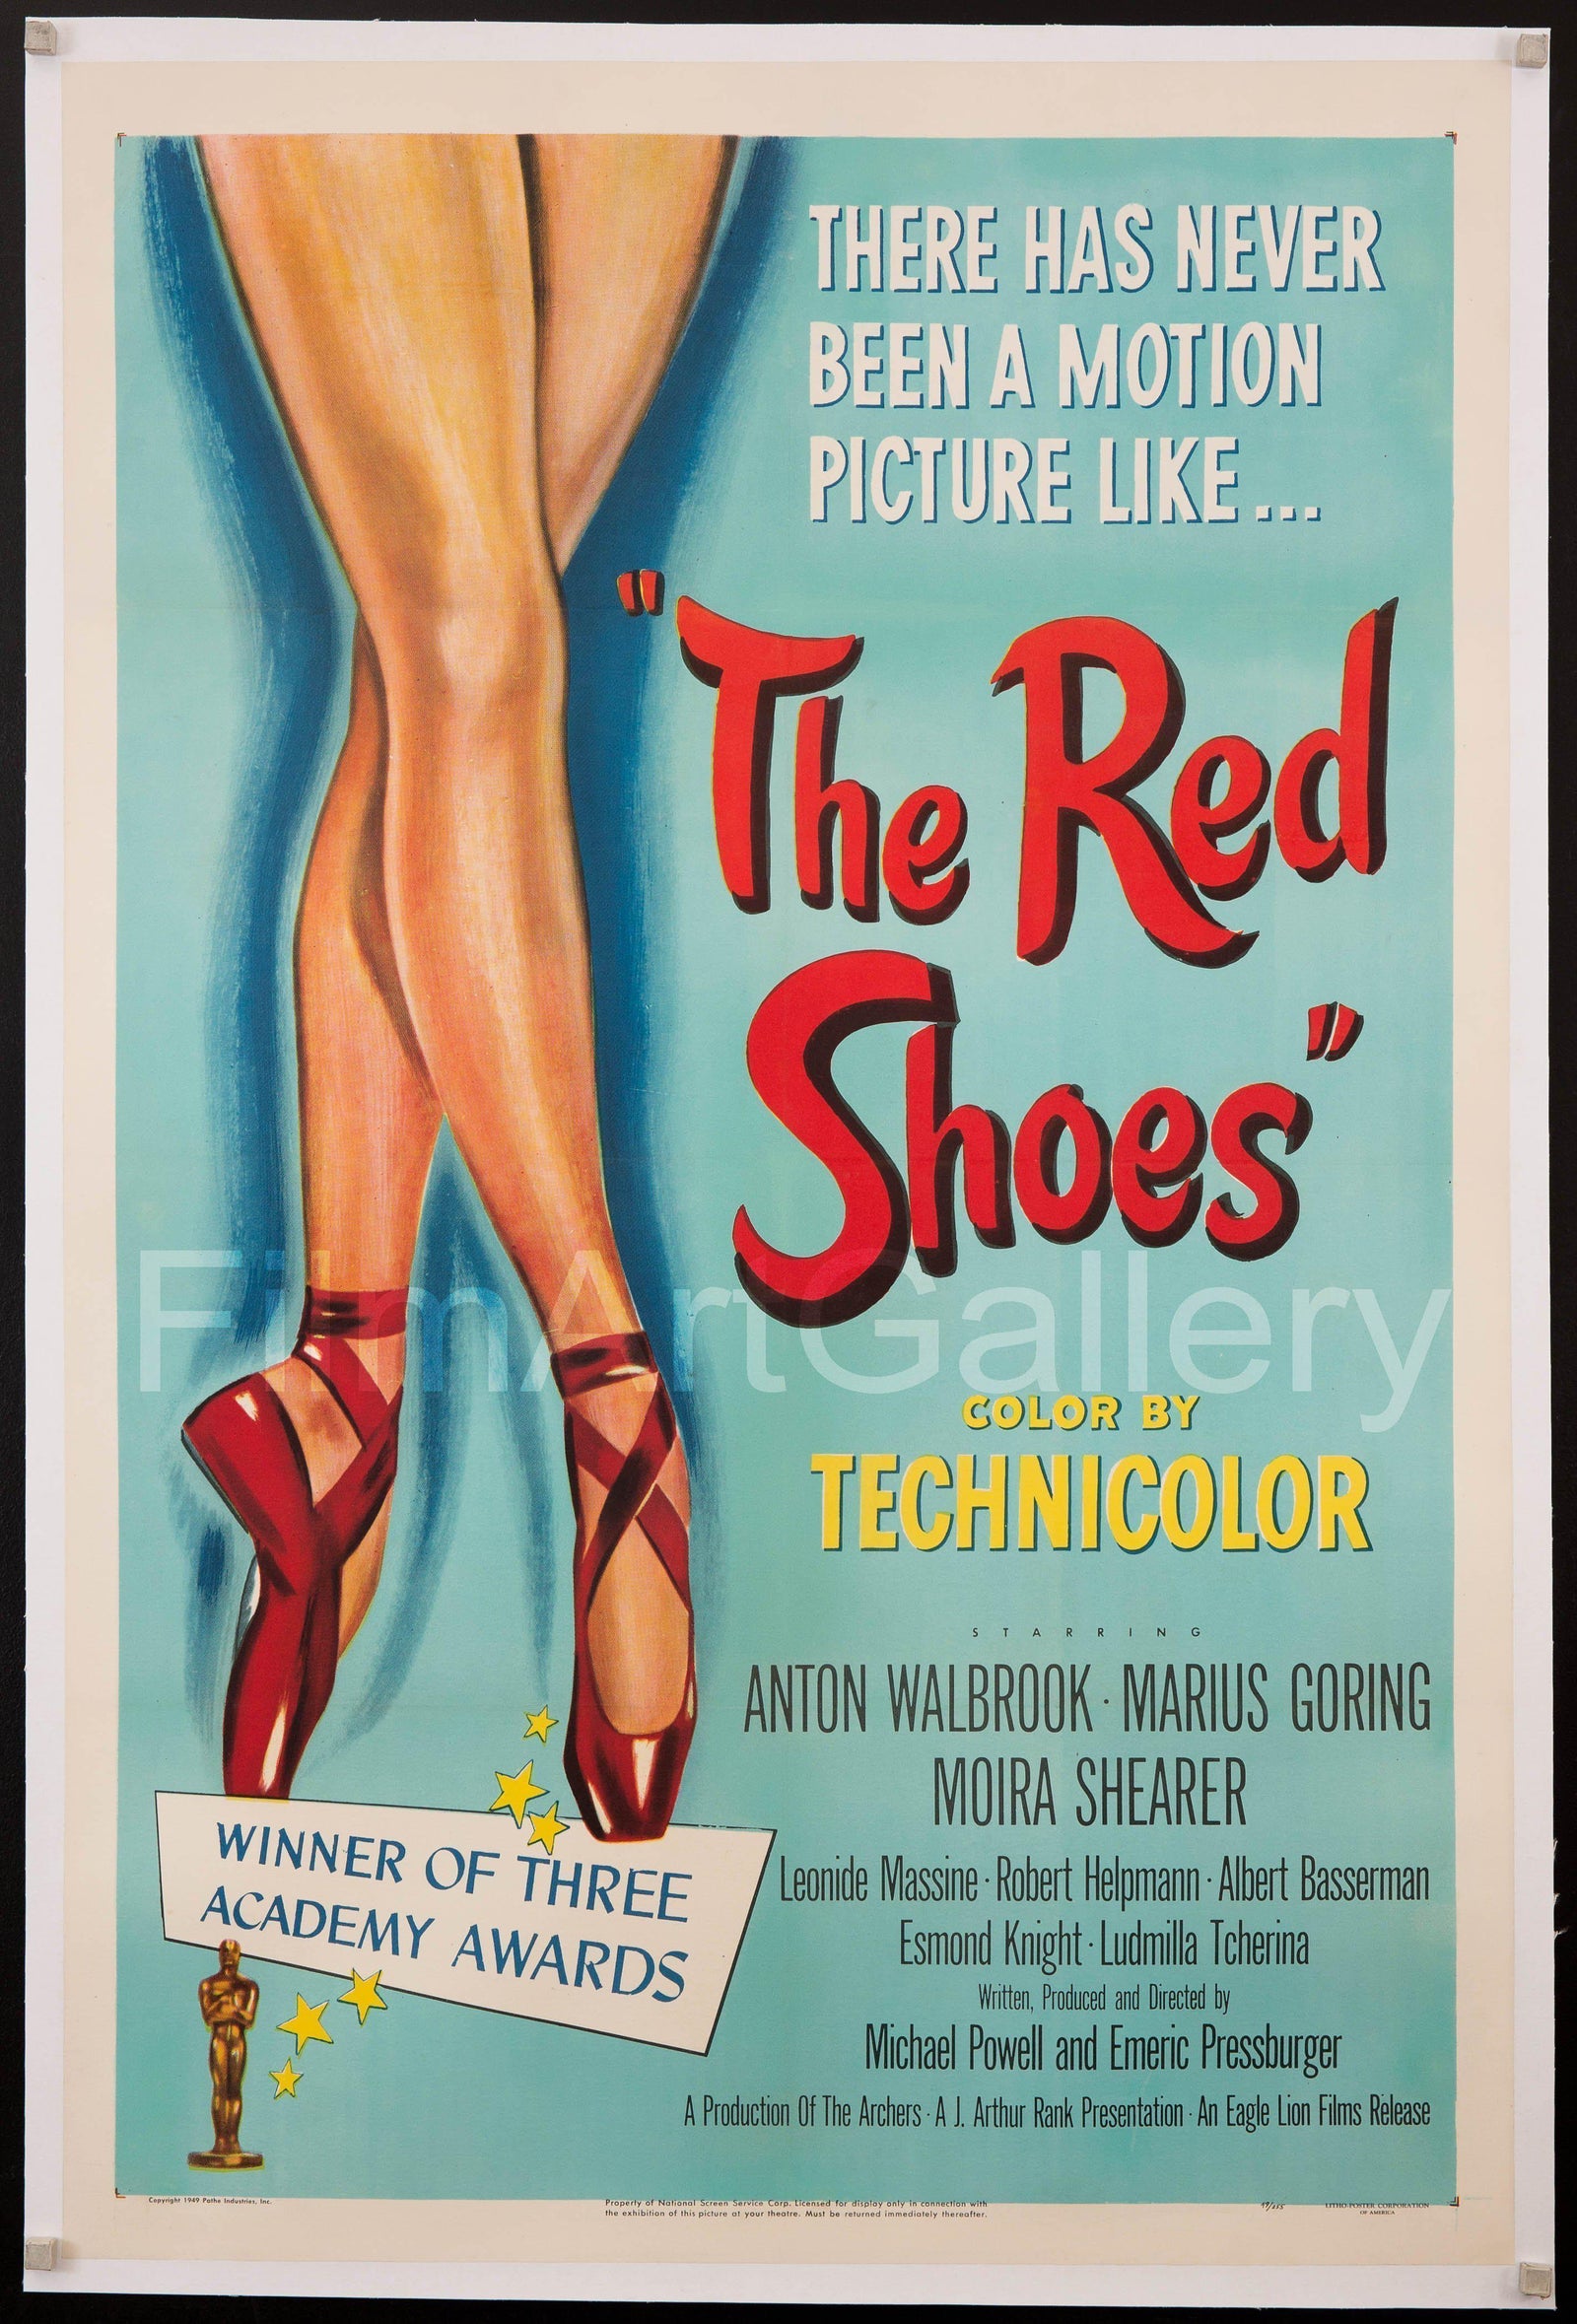 The Red Shoes Movie Poster 1949 1 Sheet (27x41)